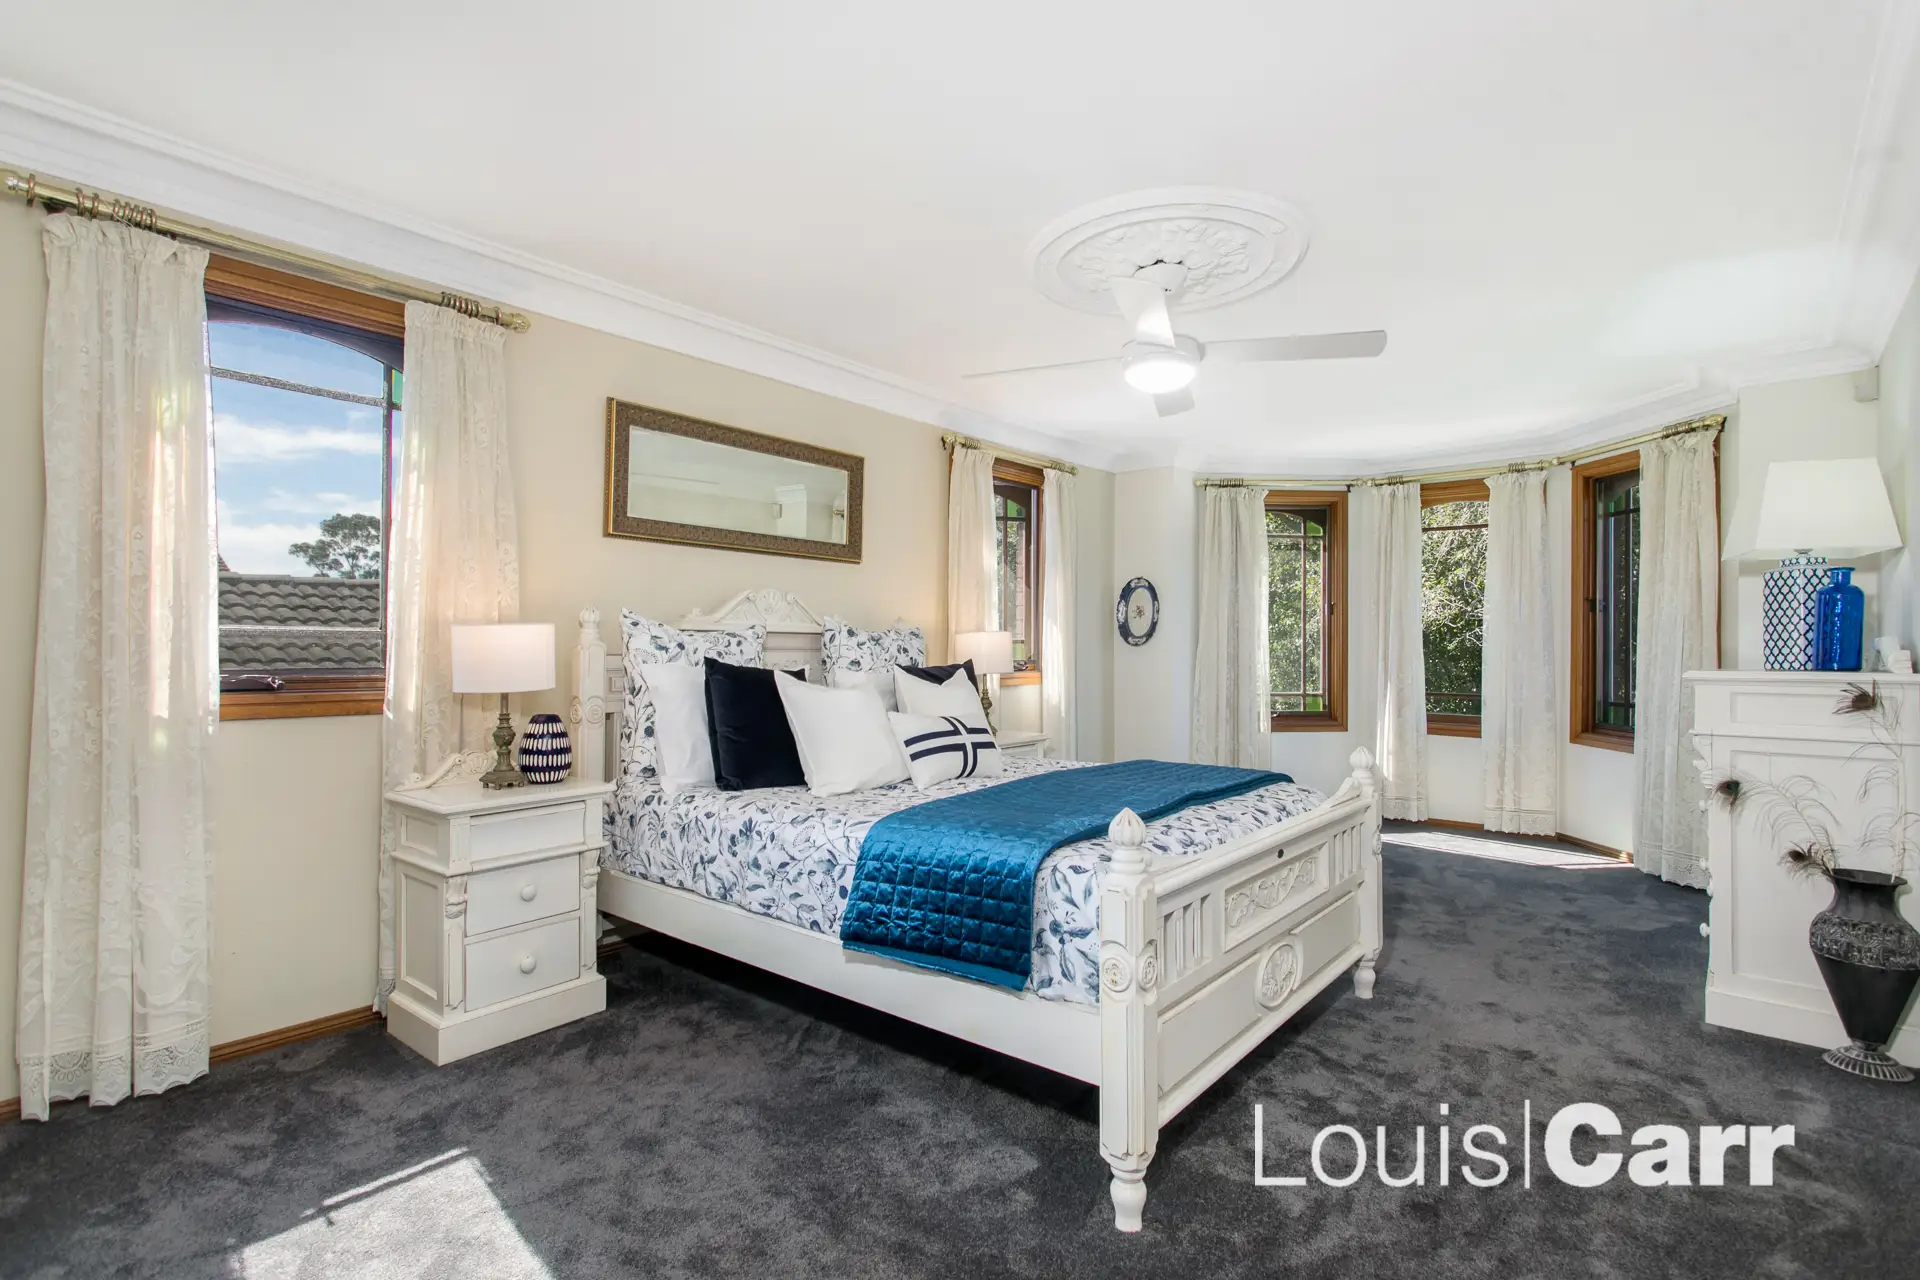 Photo #7: 15 Josephine Crescent, Cherrybrook - Sold by Louis Carr Real Estate